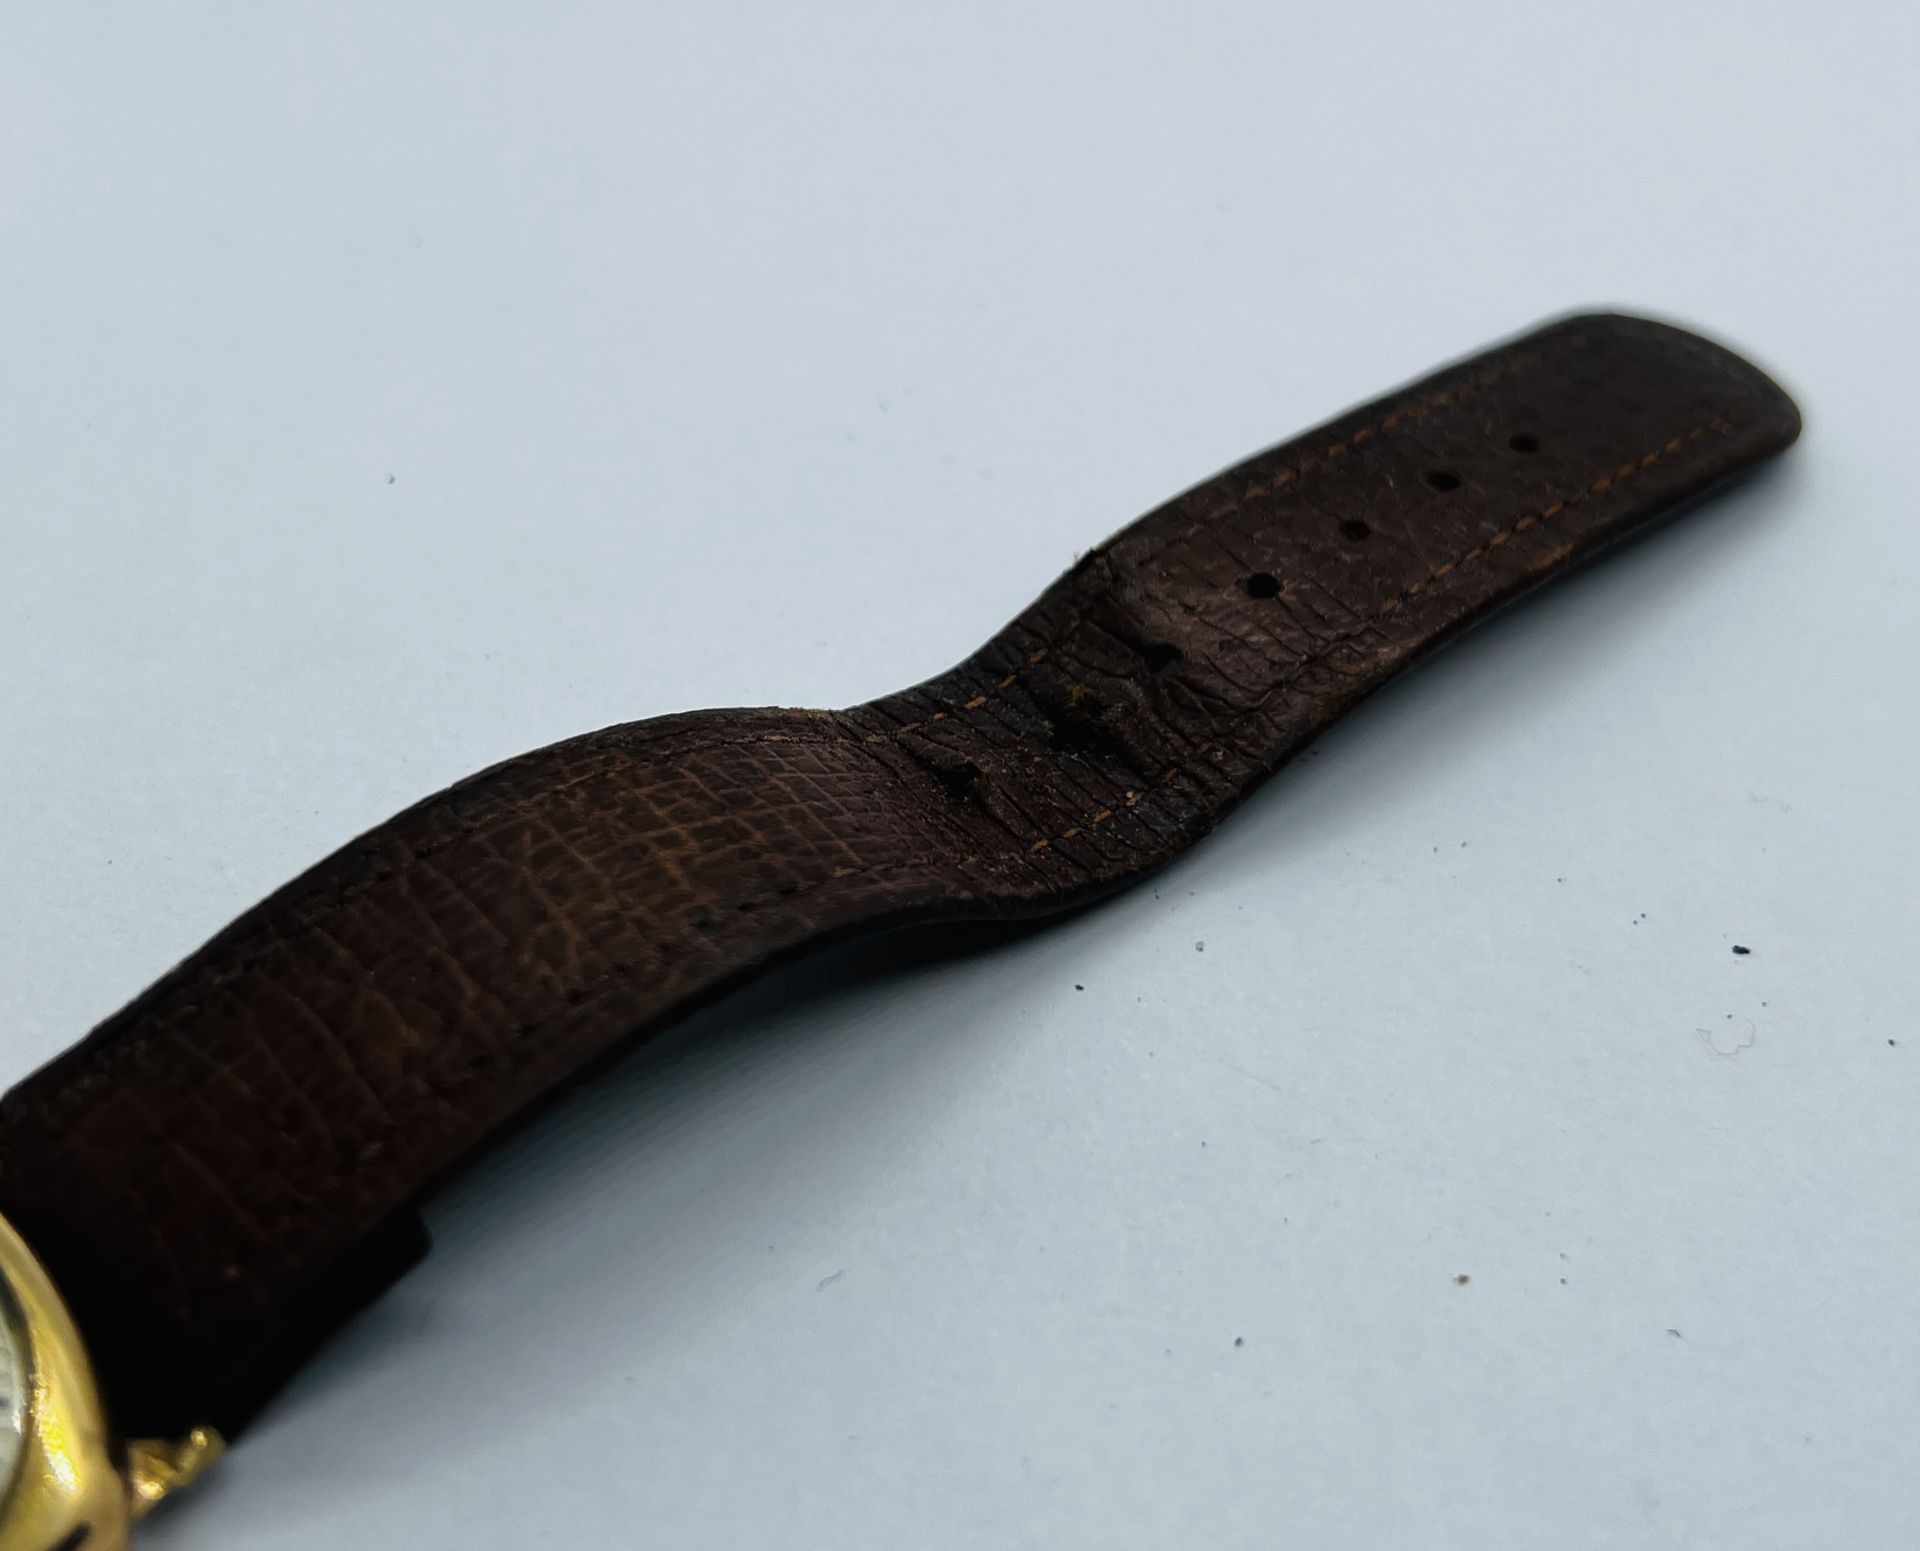 A VINTAGE 9CT GOLD CASED WRIST WATCH MARKED HERBERT ....... LTD MAGNO LUX ON A BROWN LEATHER STRAP. - Image 7 of 7